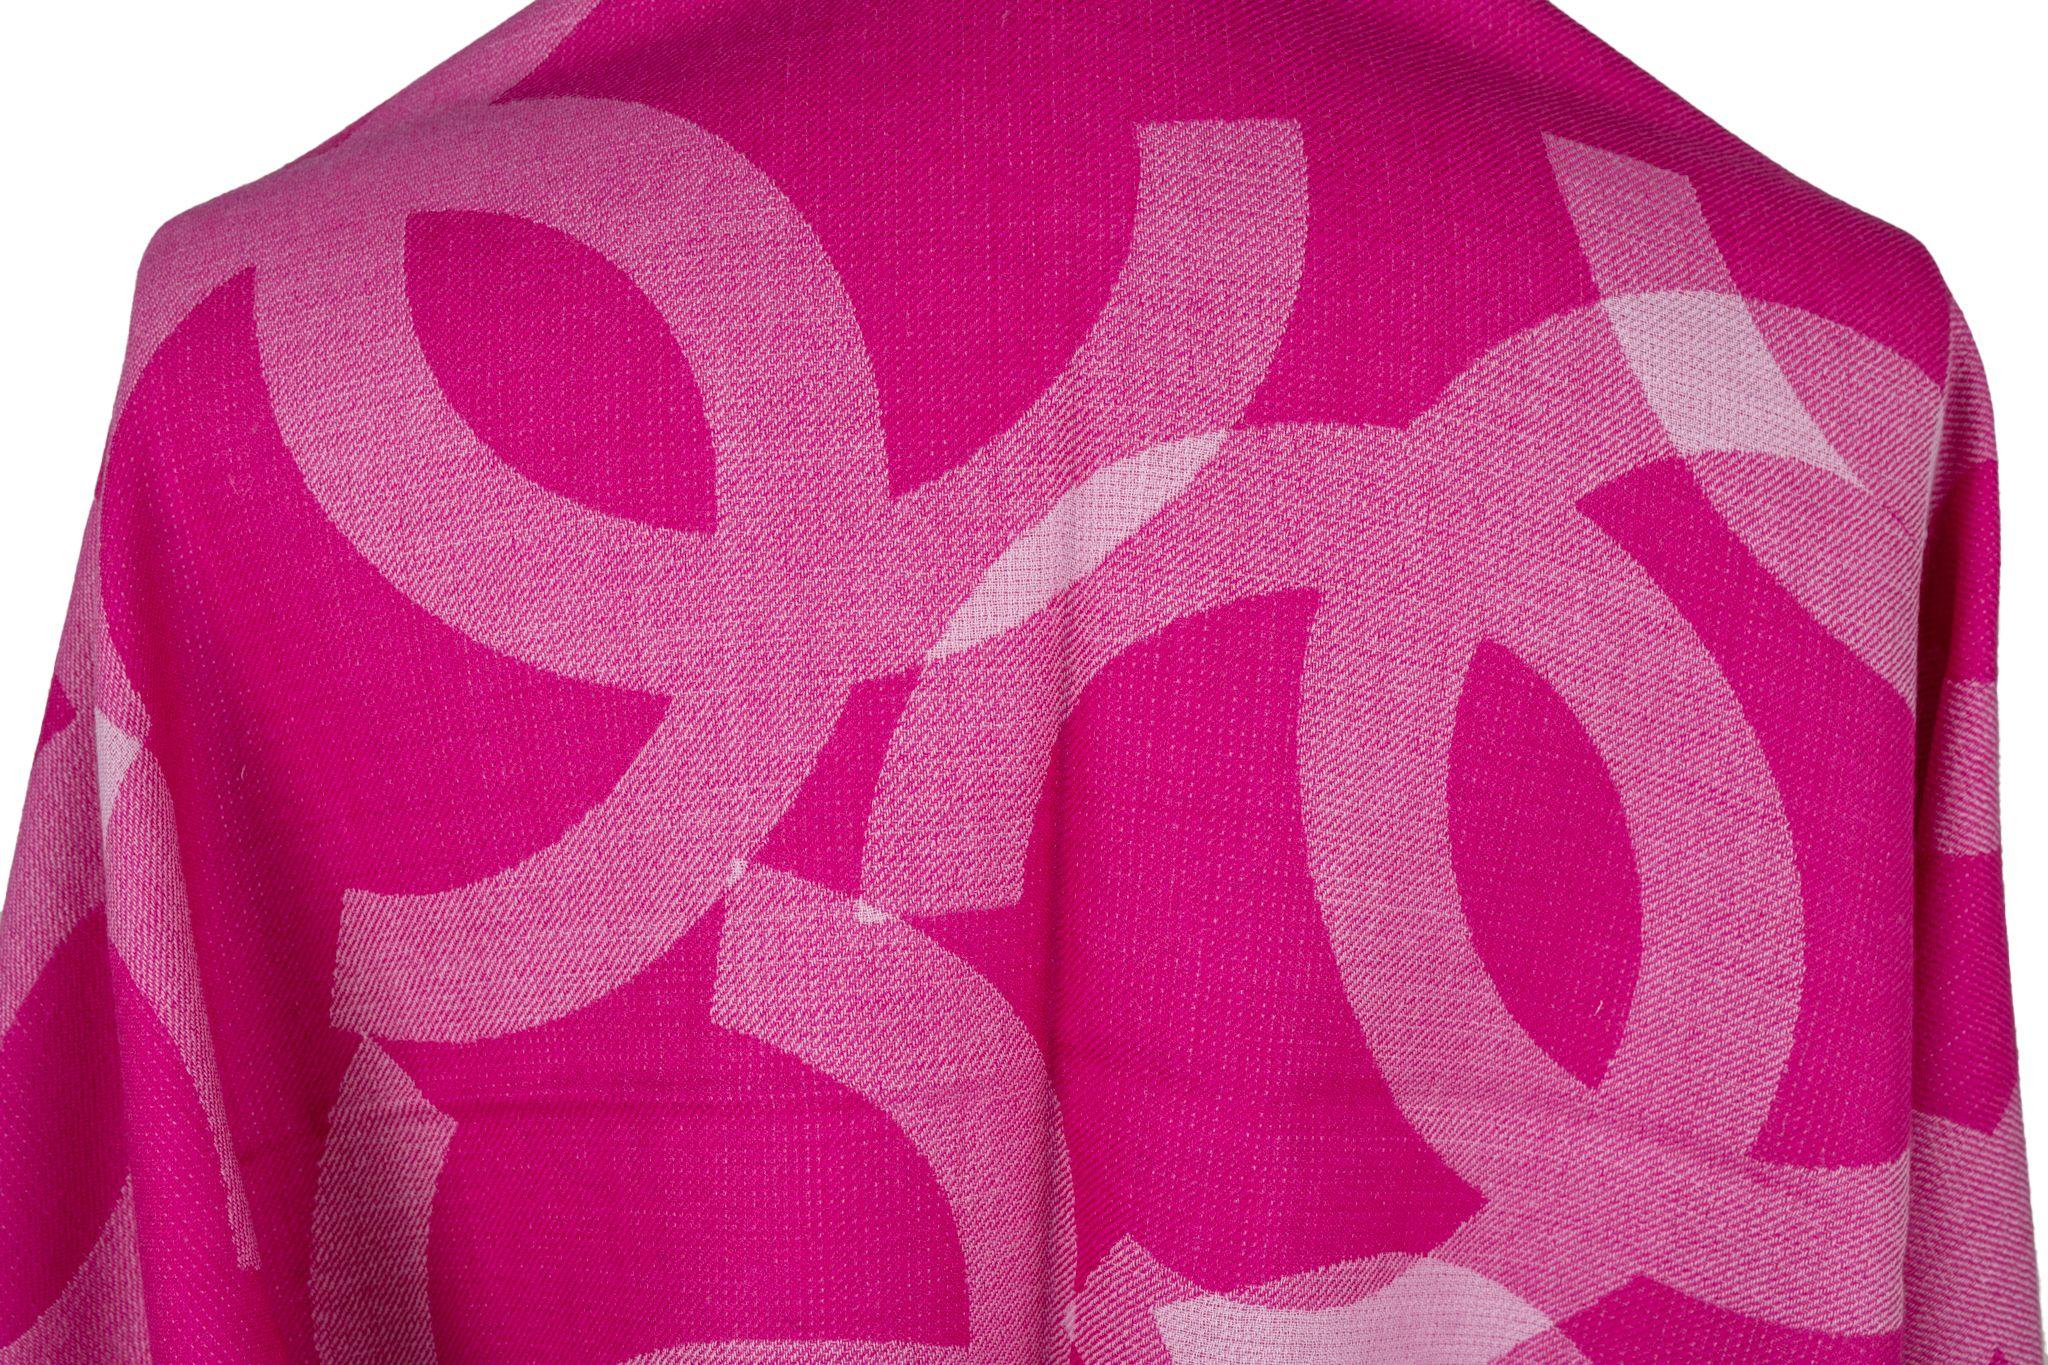 Chanel Cashmere Shawl in fuchsia. The pattern features big overlapping CC logos. The item is in new condition.